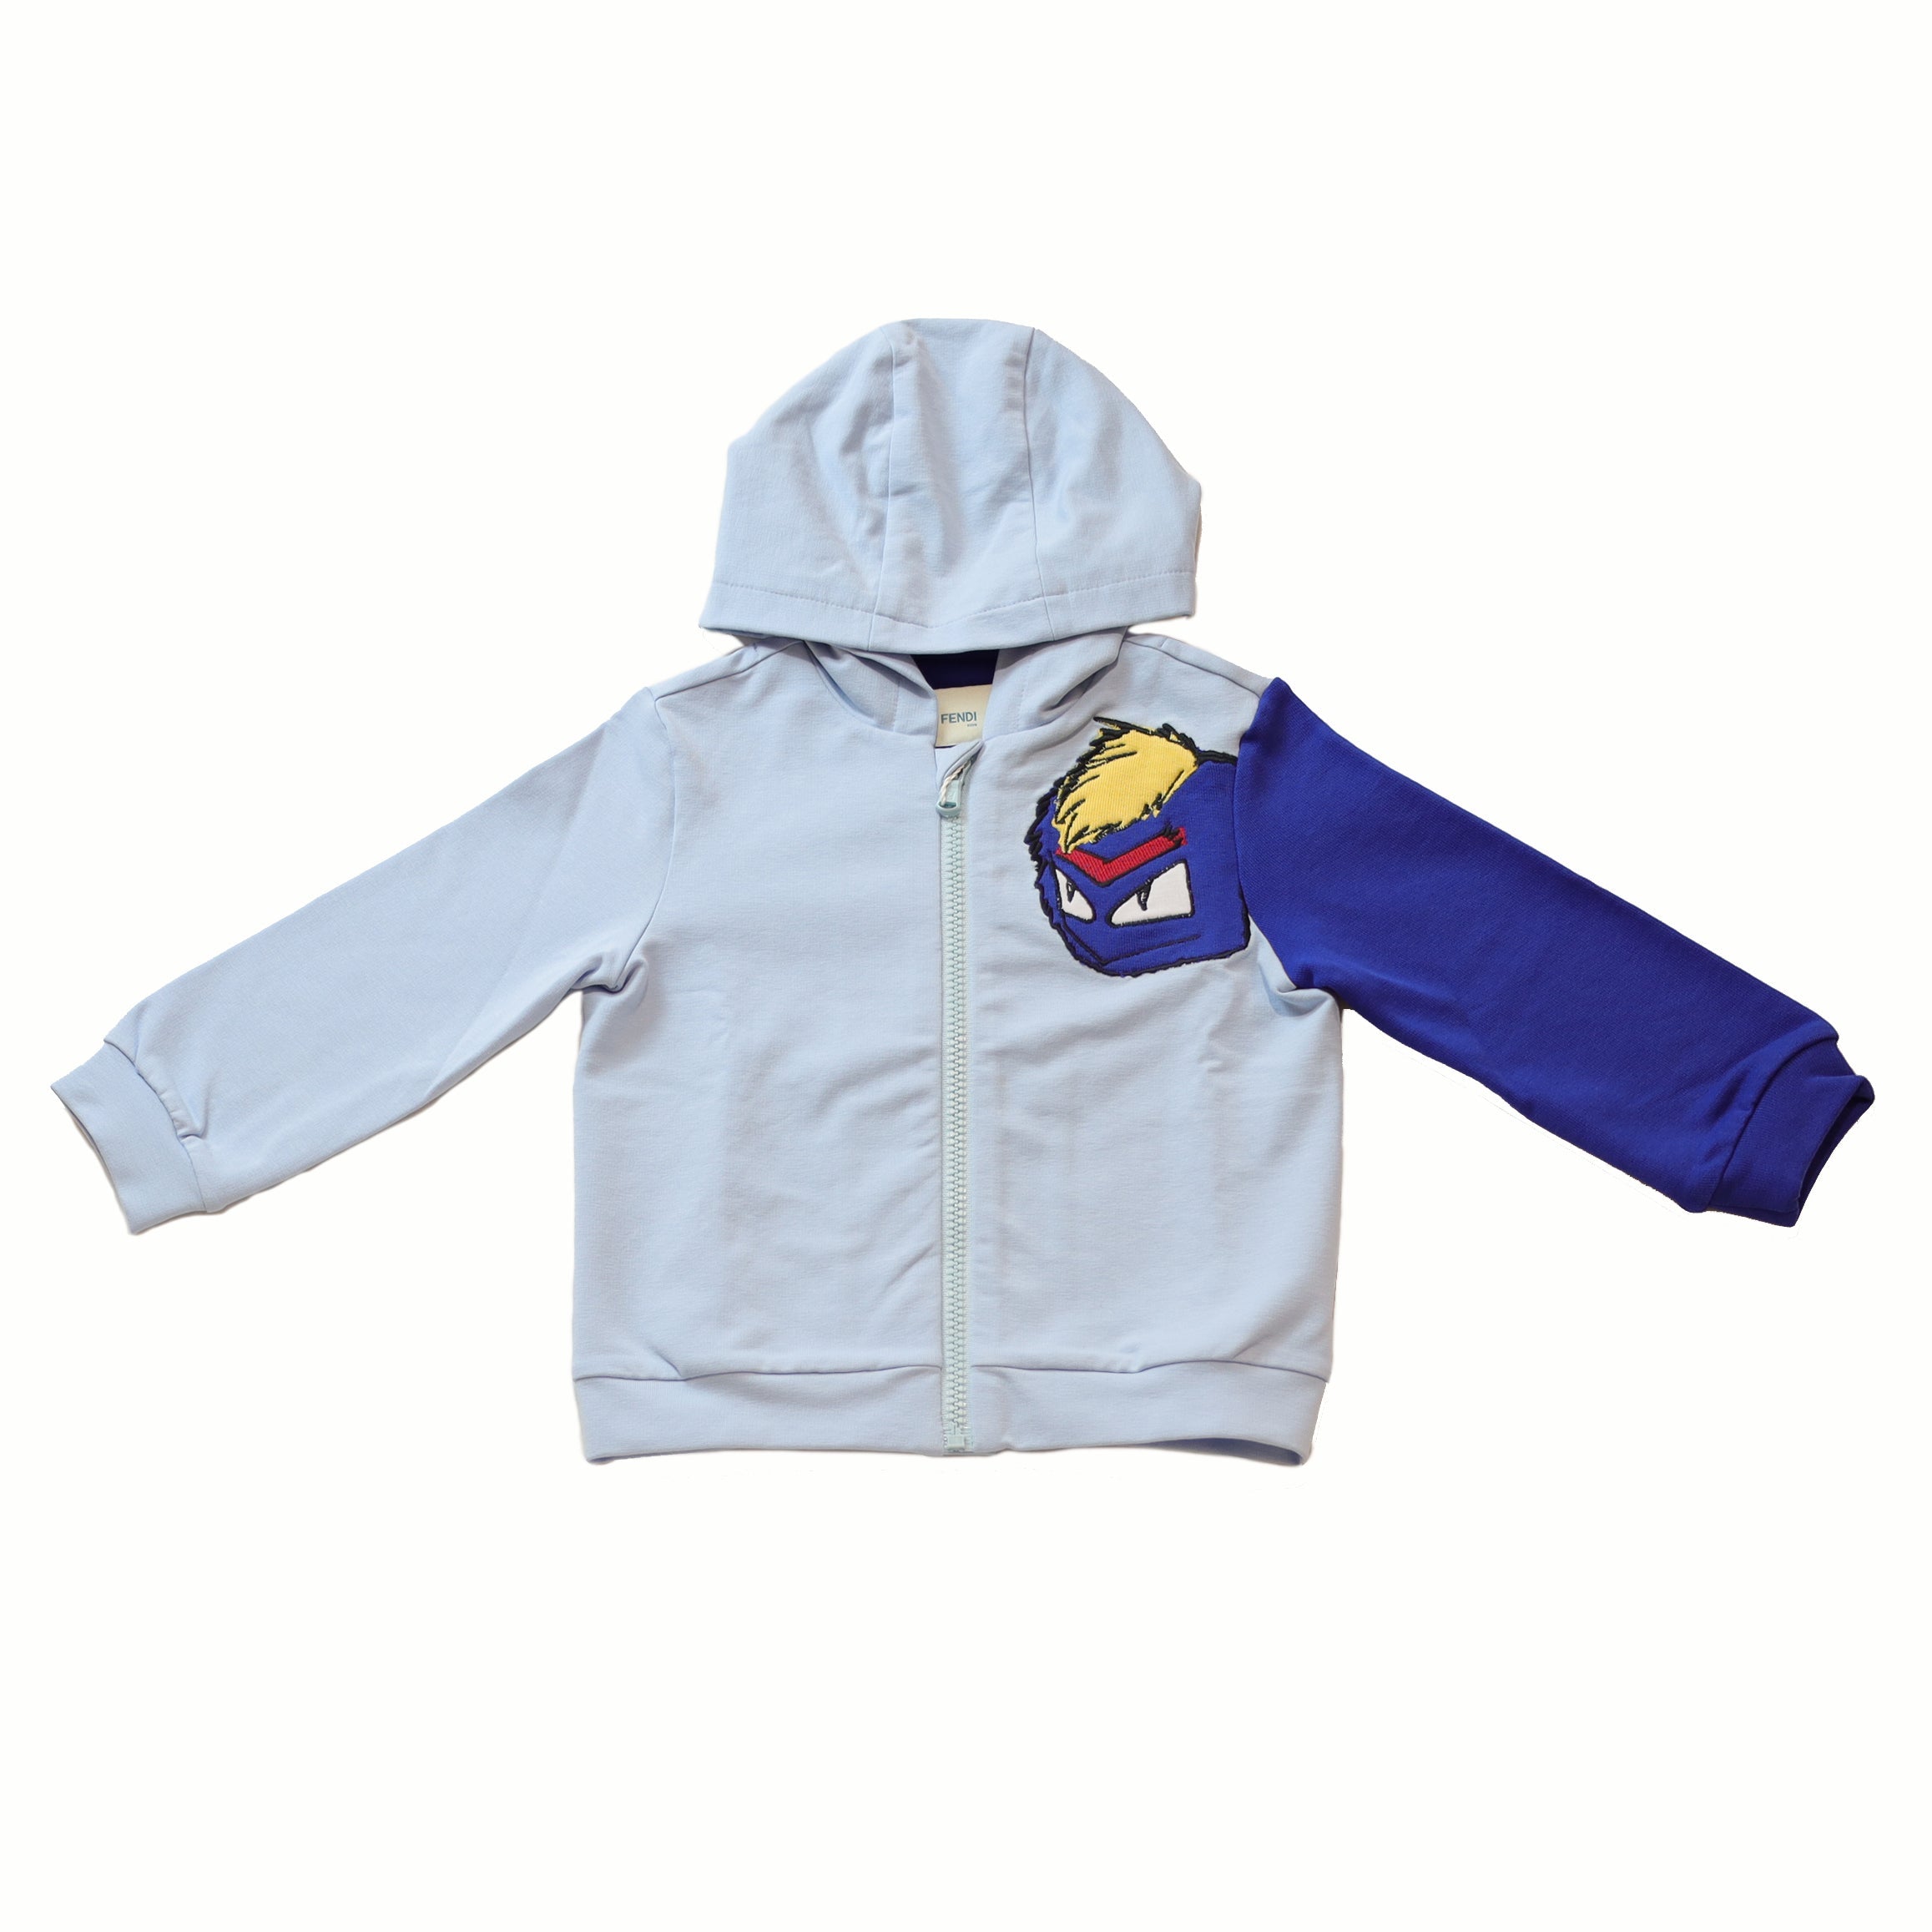 OUTLET] BOYS BABY(60-90CM)｜世界の子供服マ・メール OUTLET